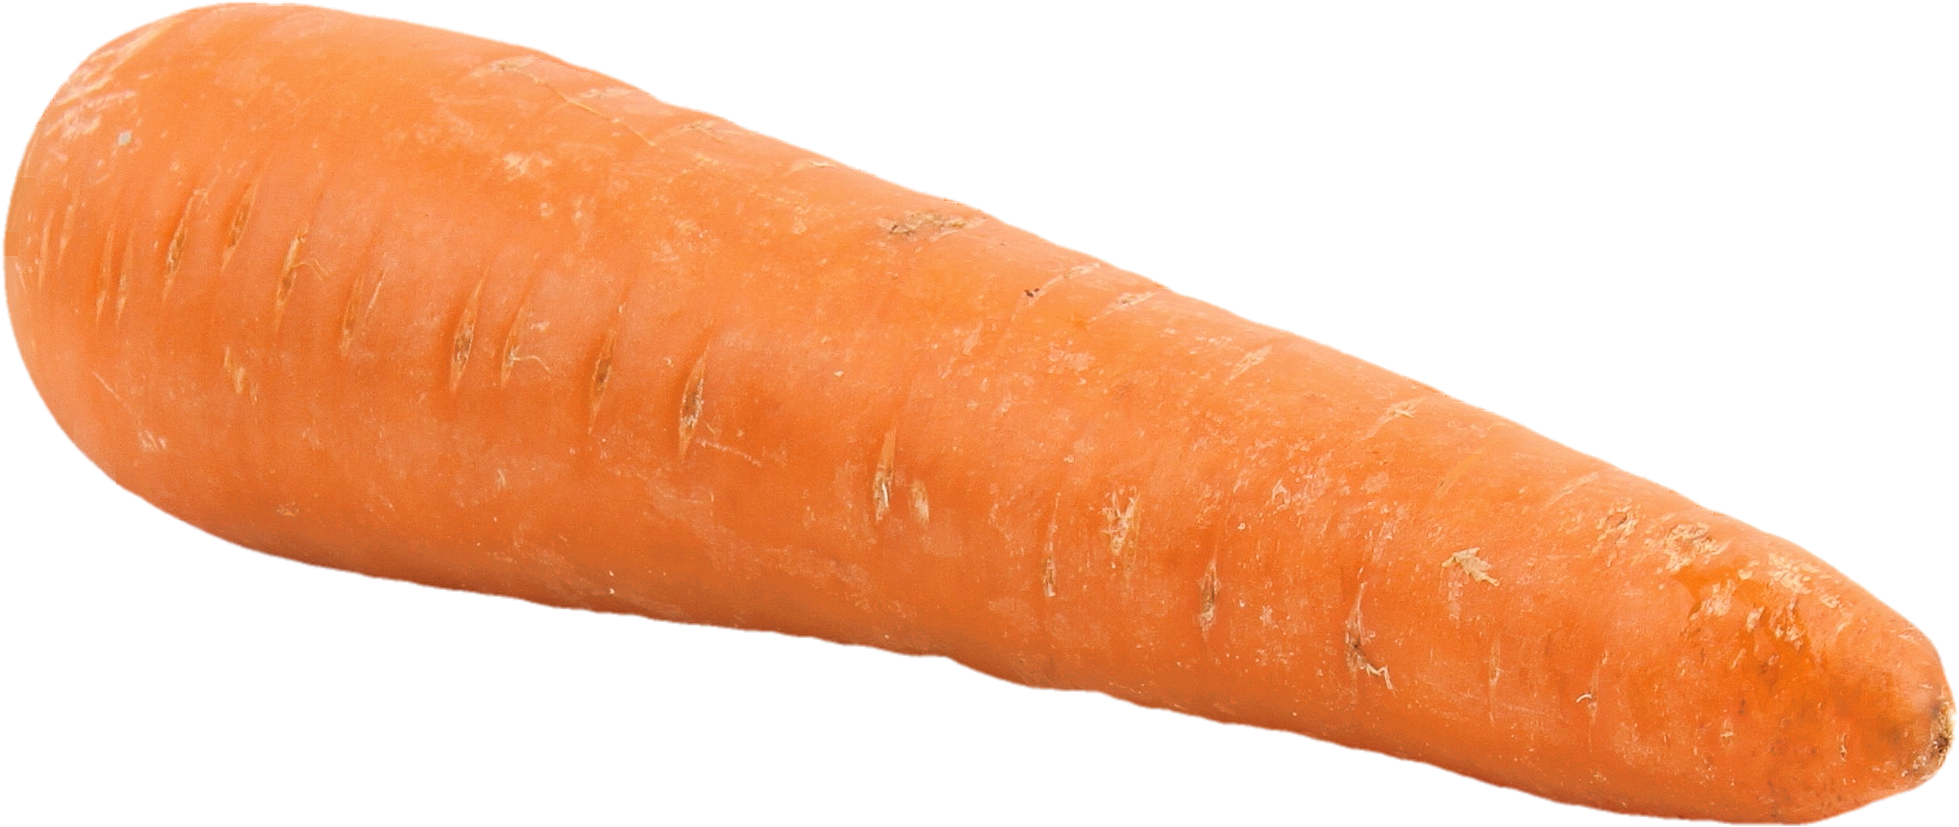 Fresh Single Carrot Isolated.png